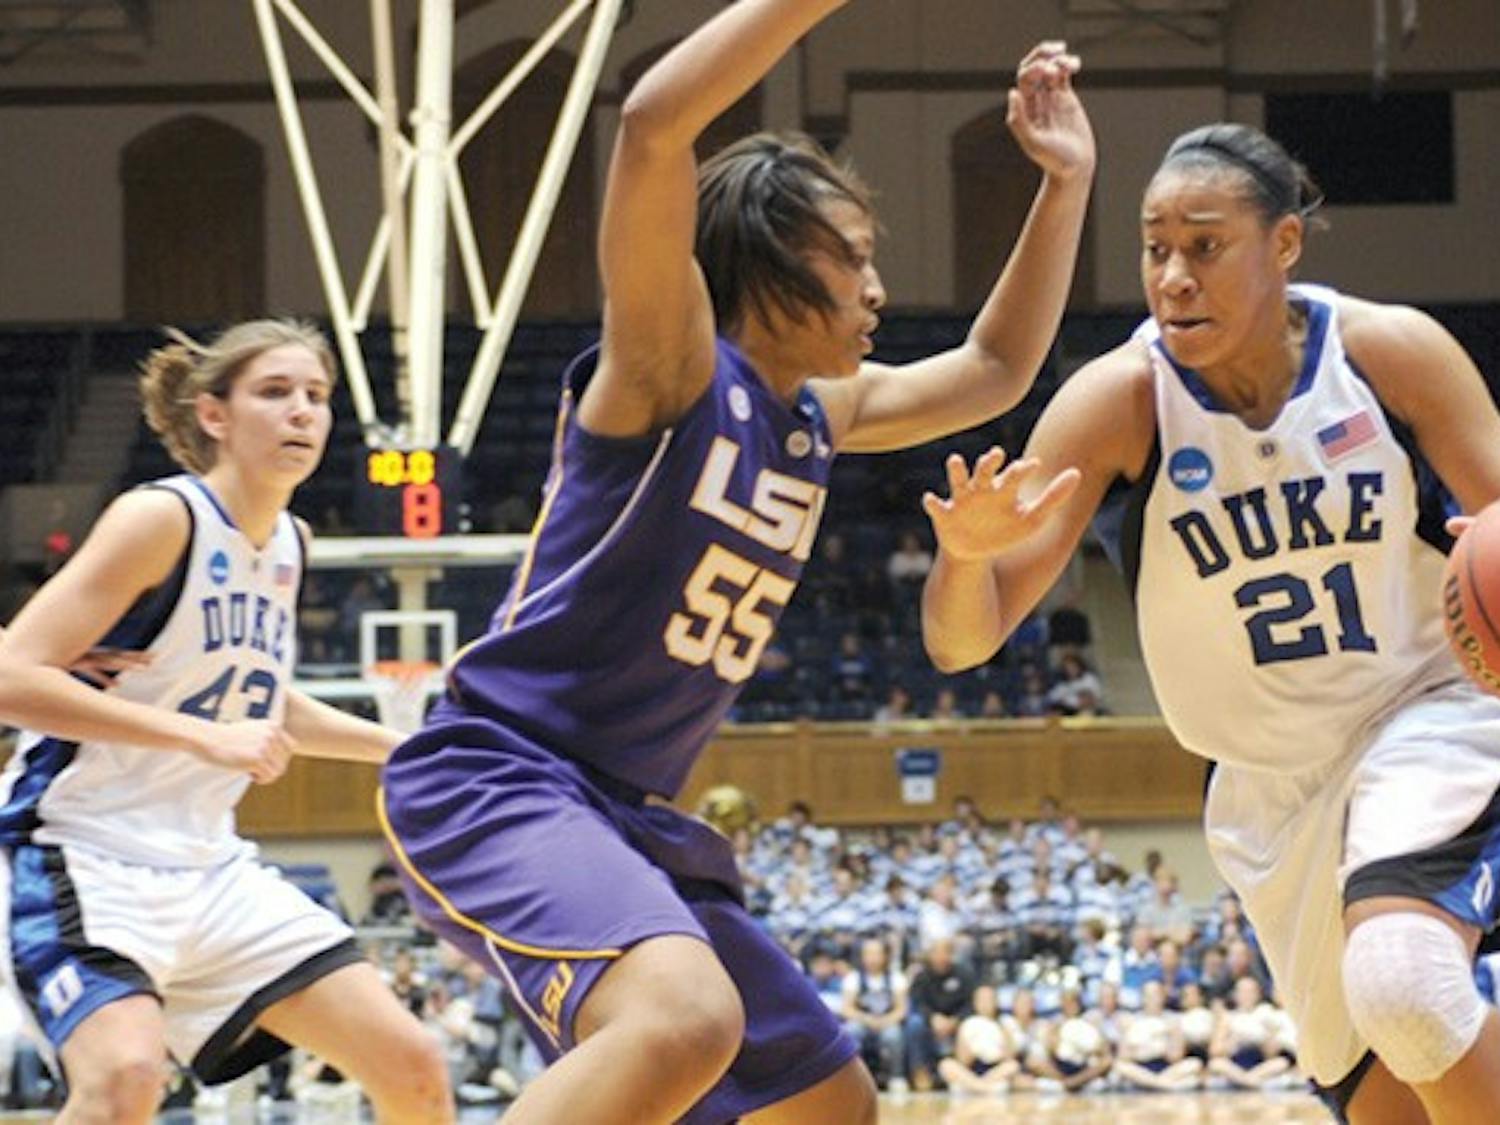 Senior Bridgette Mitchell’s quality shooting kept Duke level with Louisiana State for much of the second half, and late scoring by fellow seniors Joy Cheek and Keturah Jackson sent the Blue Devils to a win over the Tigers.